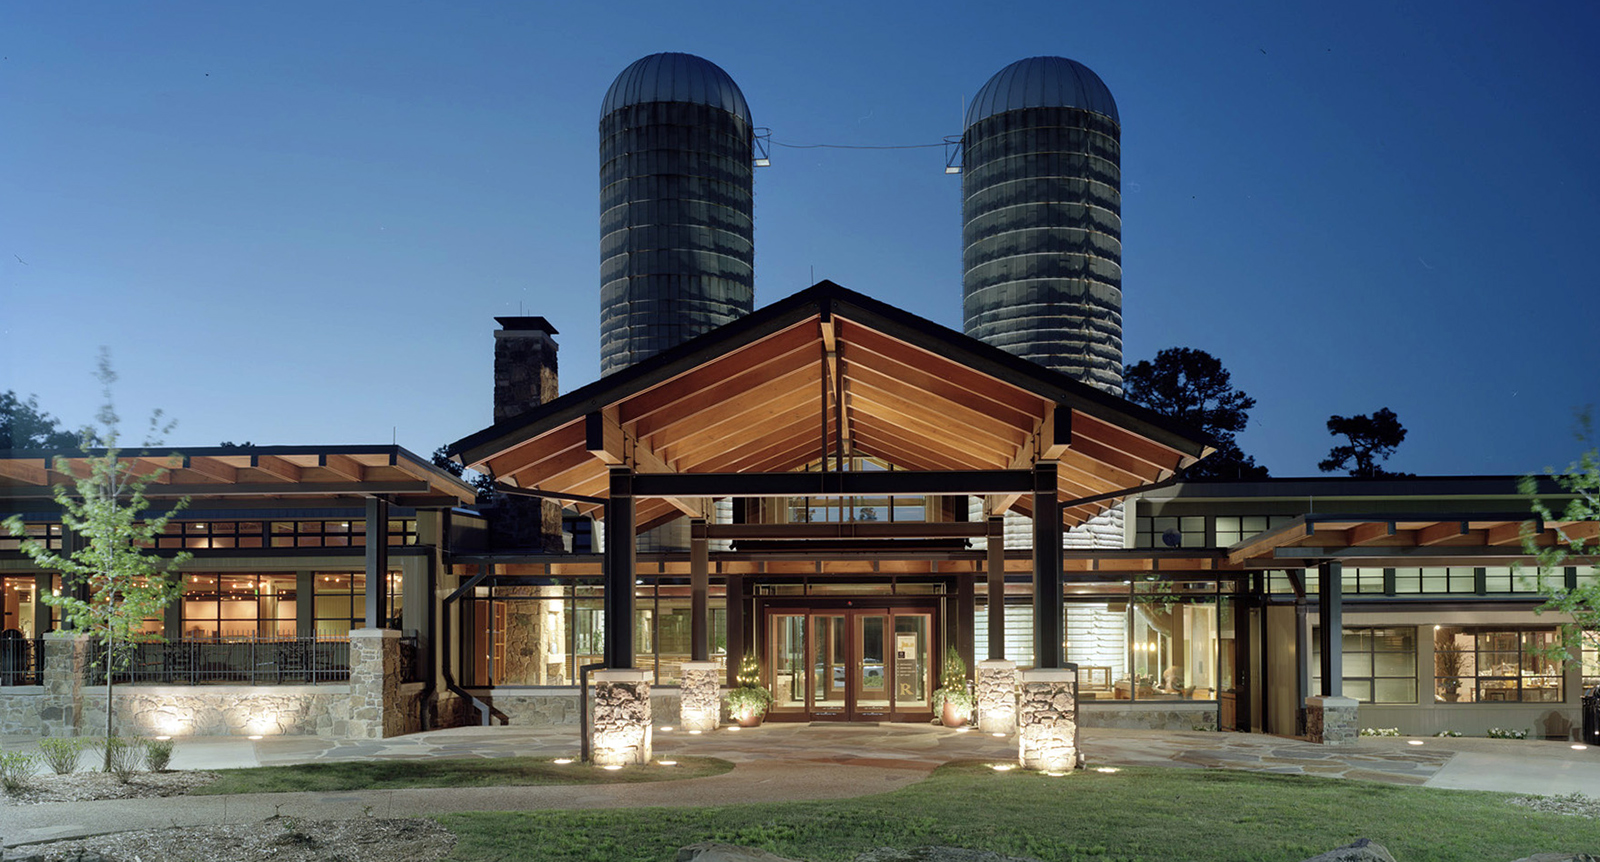 Winthrop Rockefeller Conference Center and Lodge